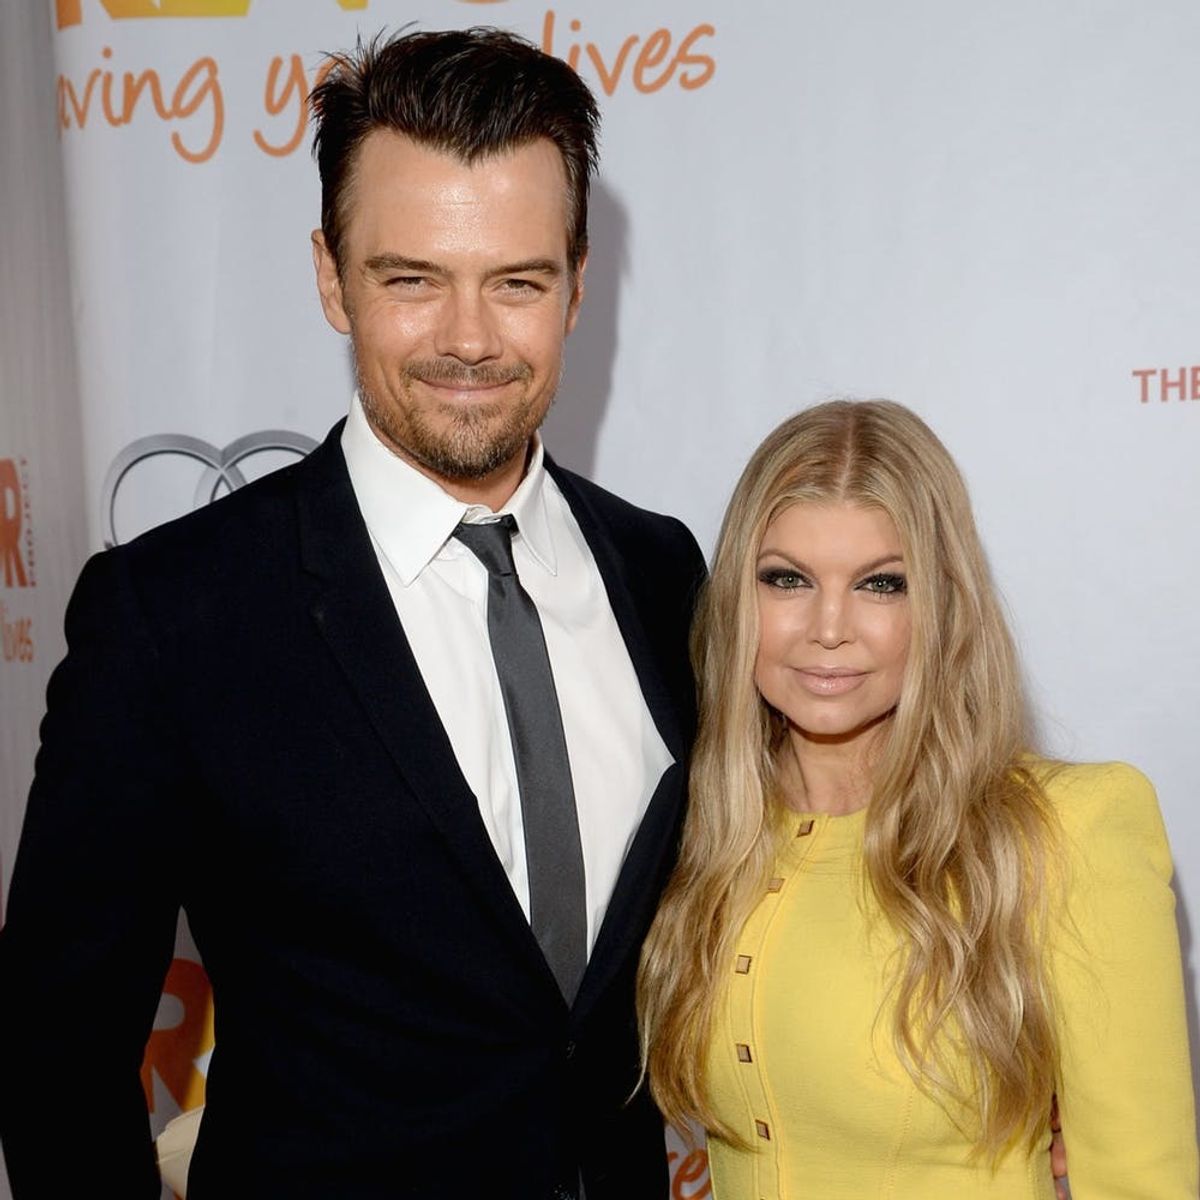 Fergie and Josh Duhamel Have Separated After 8 Years of Marriage